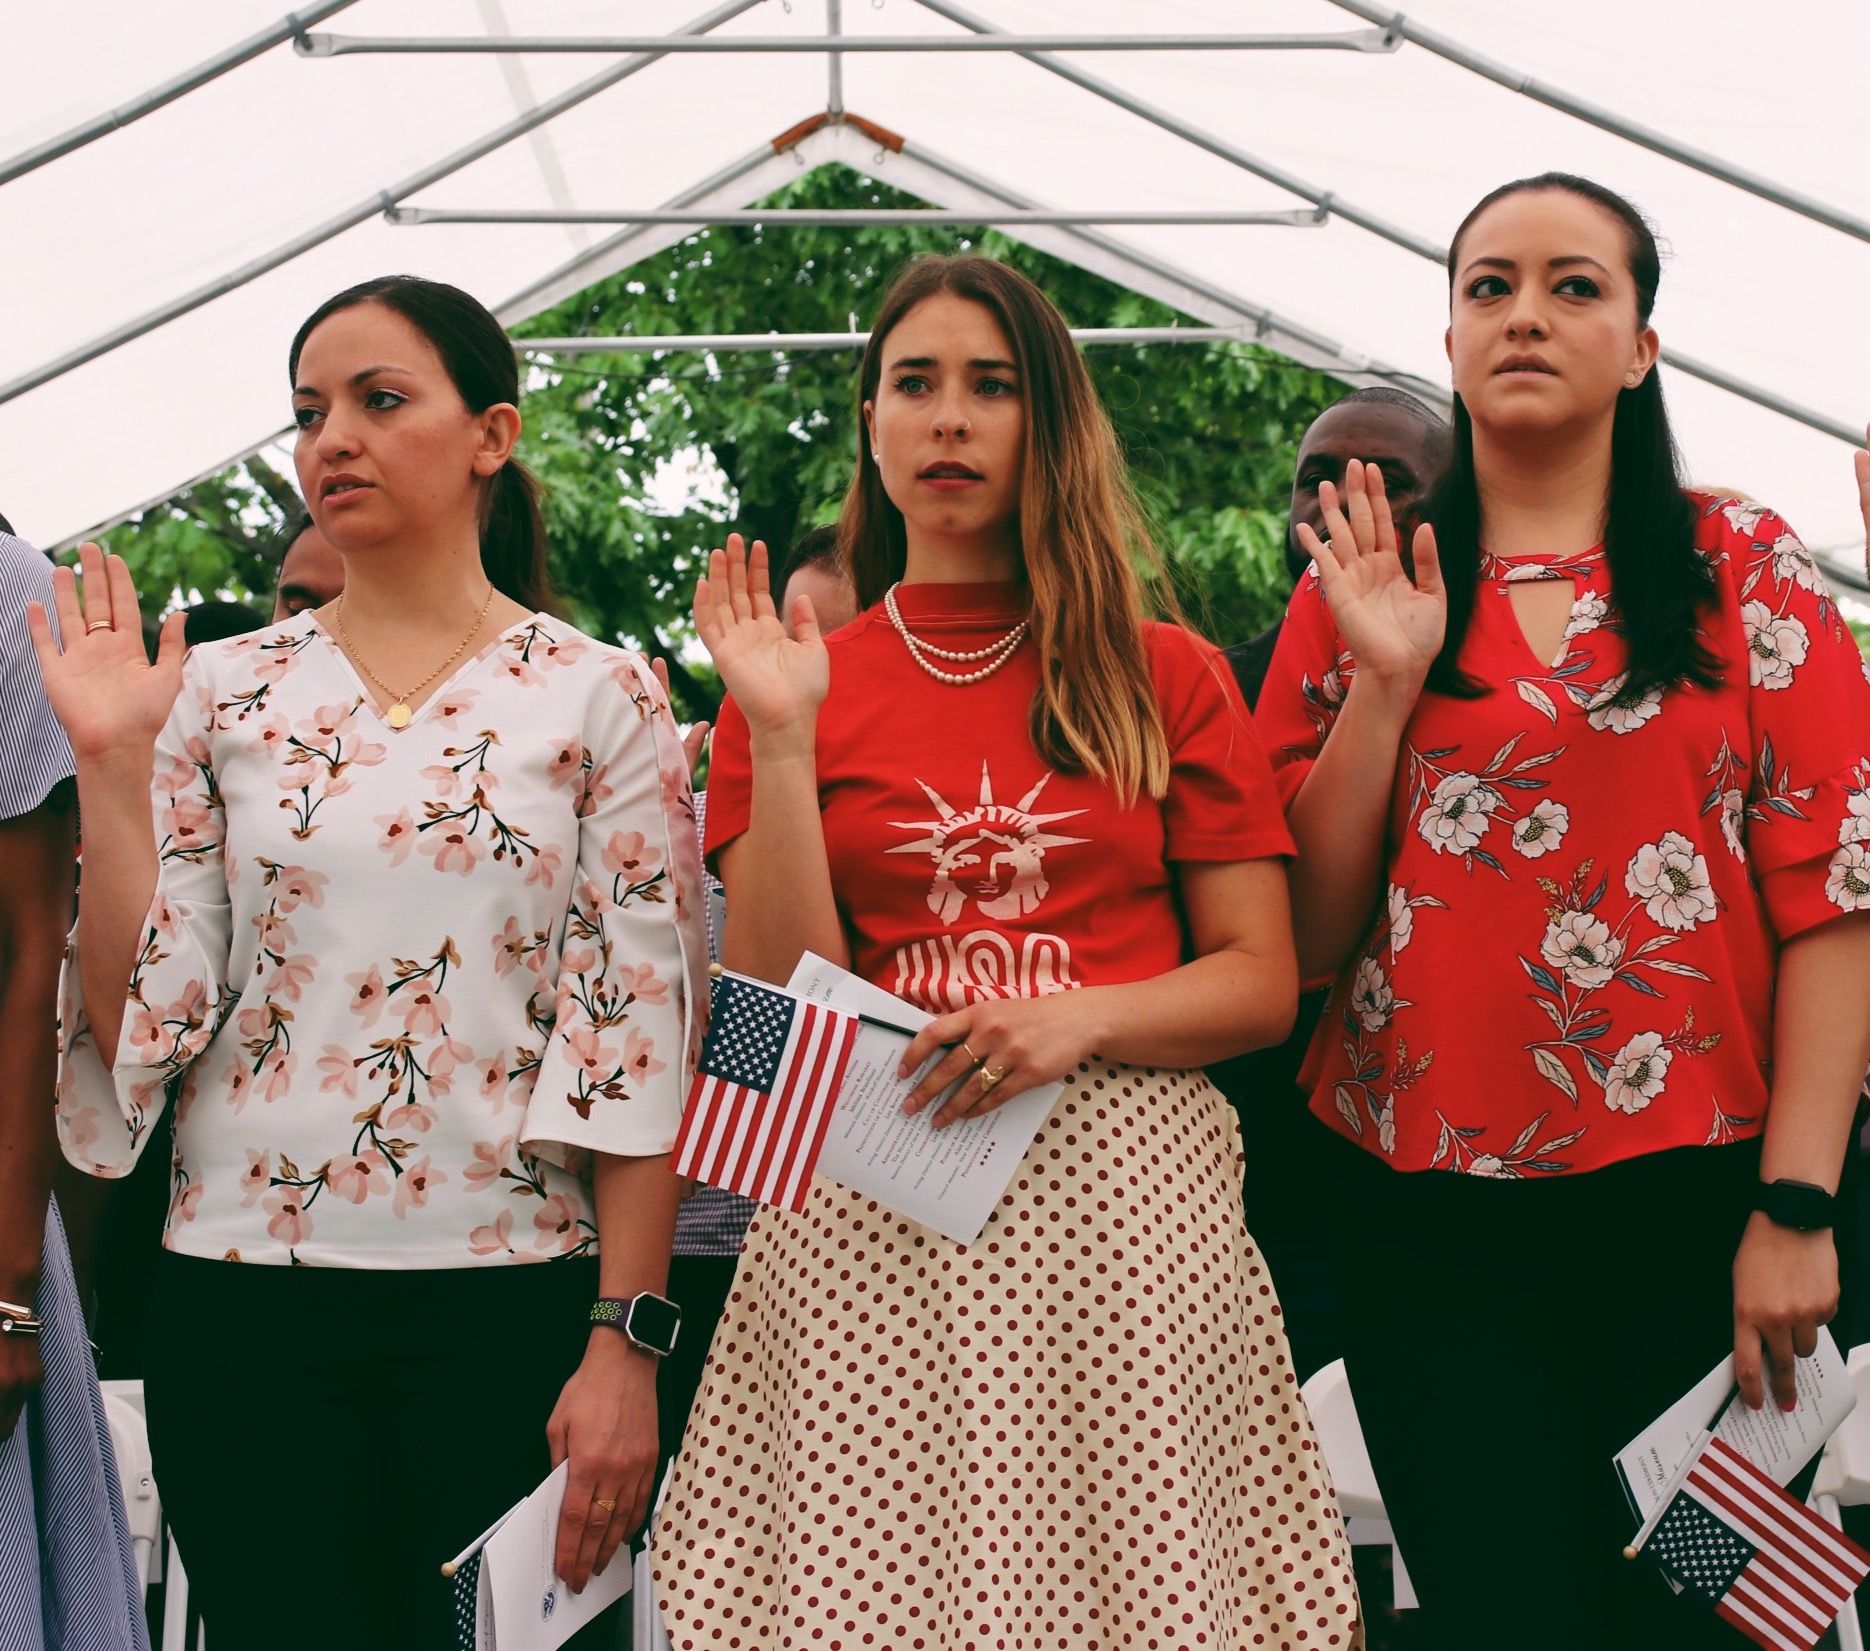 37 Brooklynites Become U.S Citizens On Flag Day At Wyckoff House